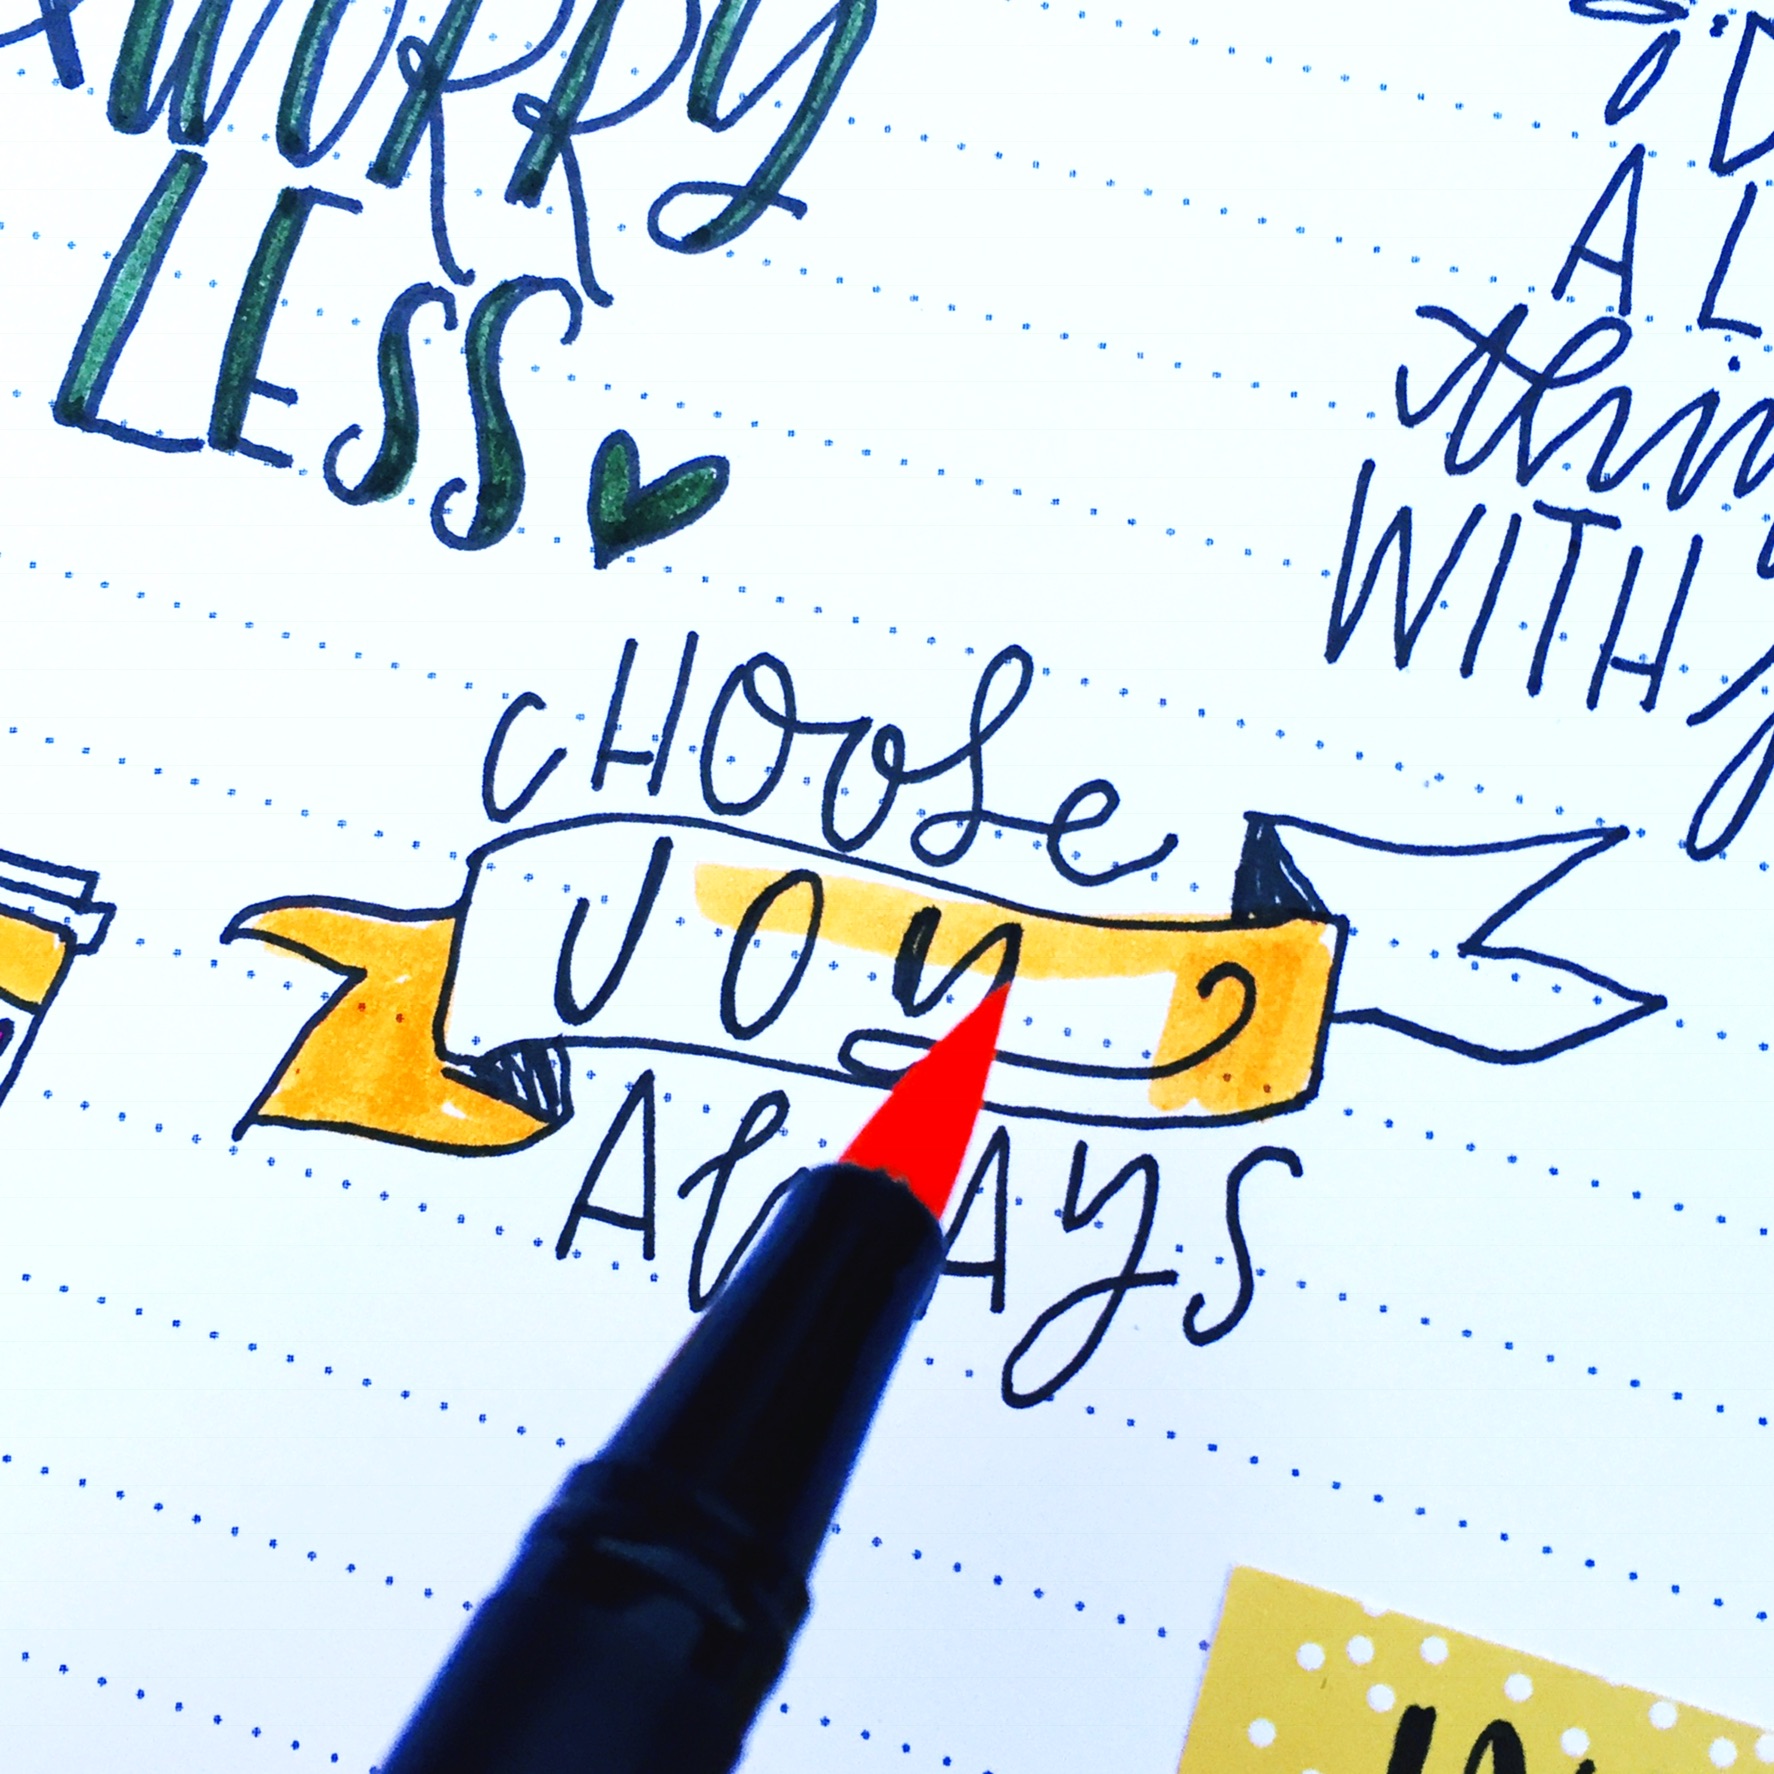 Learn lettering tips and tricks from Lauren Fitzmaurice of @renmadecalligraphy using the new Tombow MONO Drawing Pens from tombowusa.com.